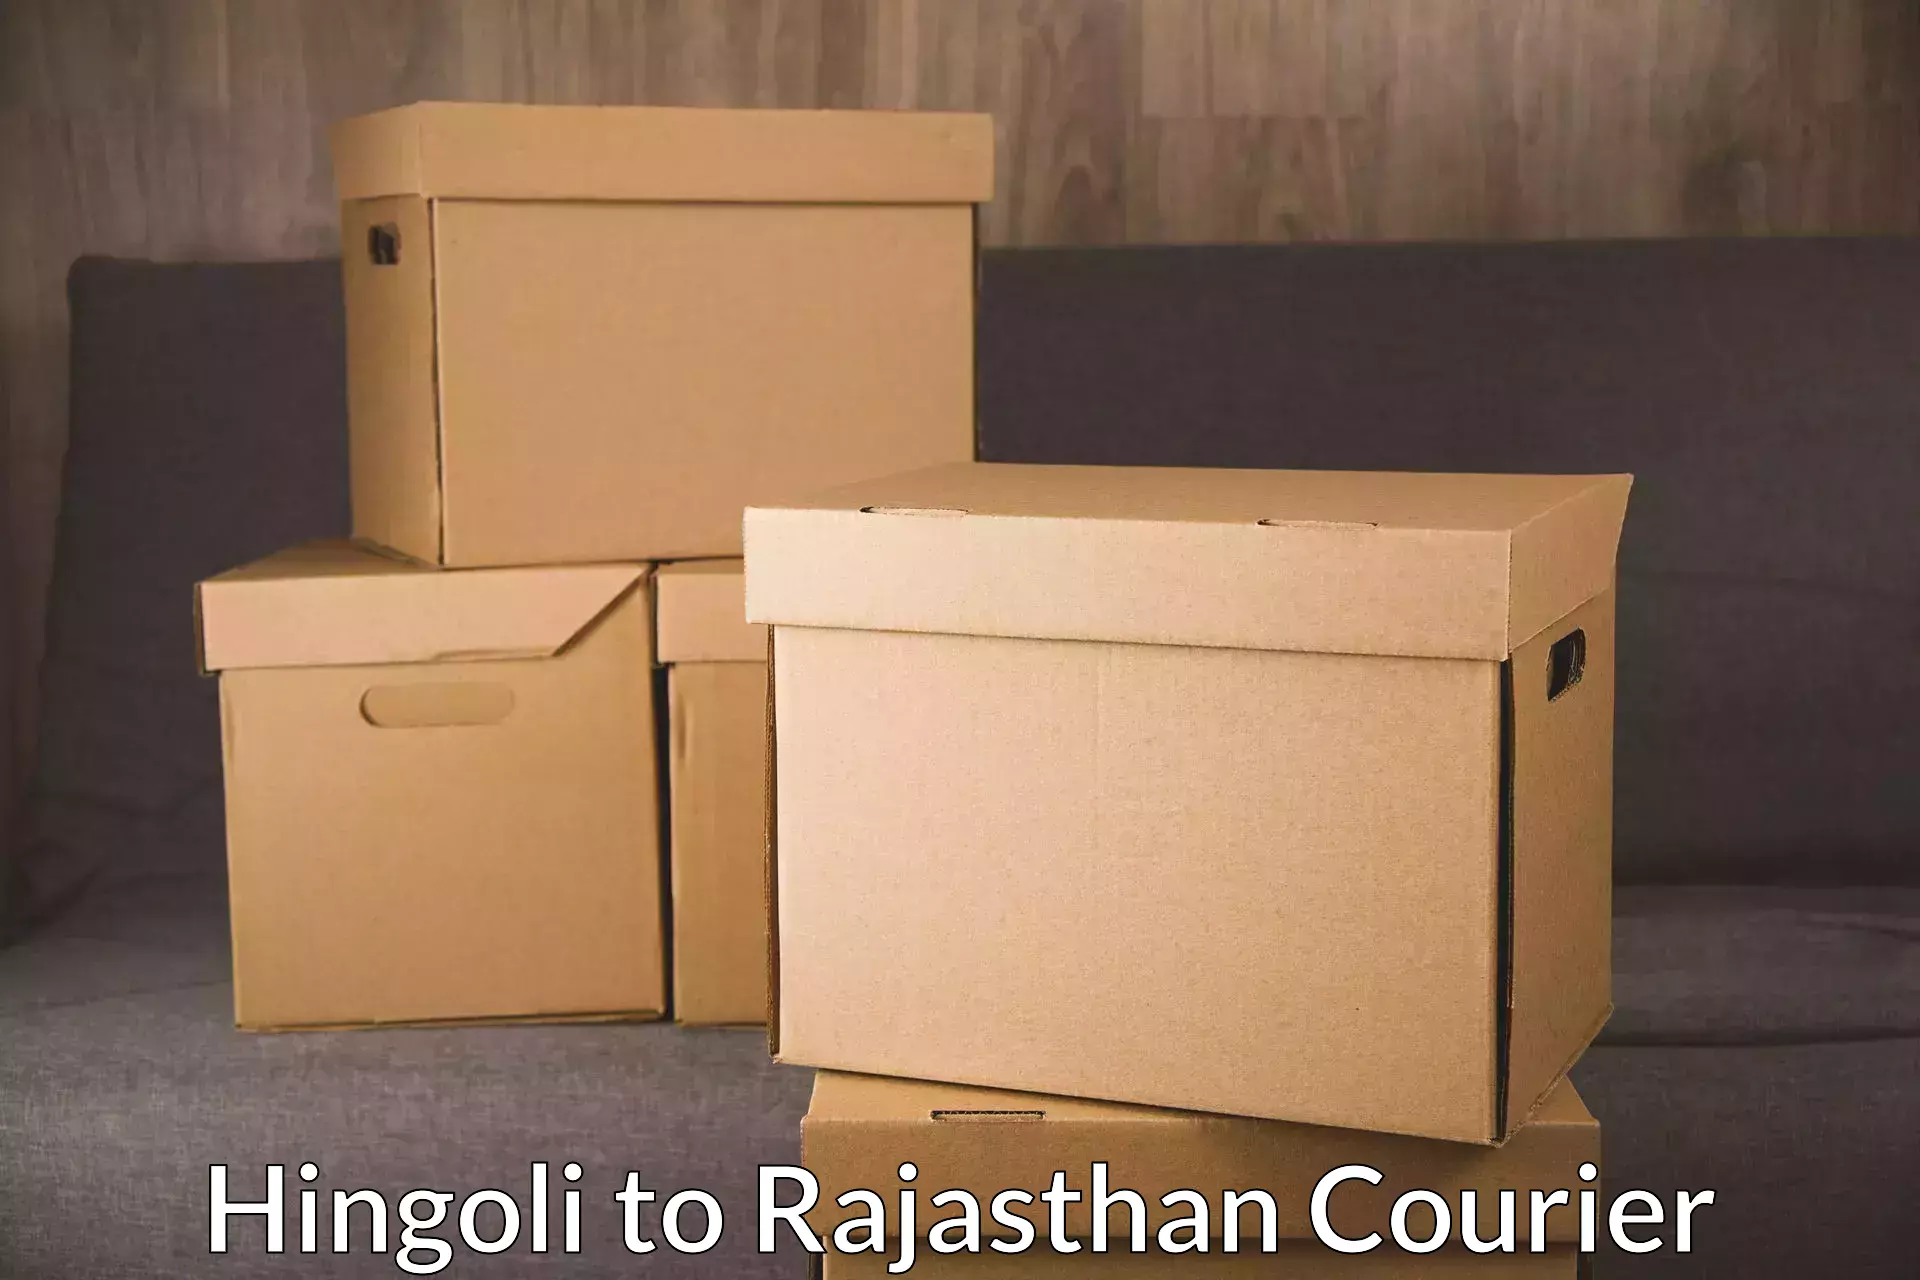 Package delivery network Hingoli to Nagaur